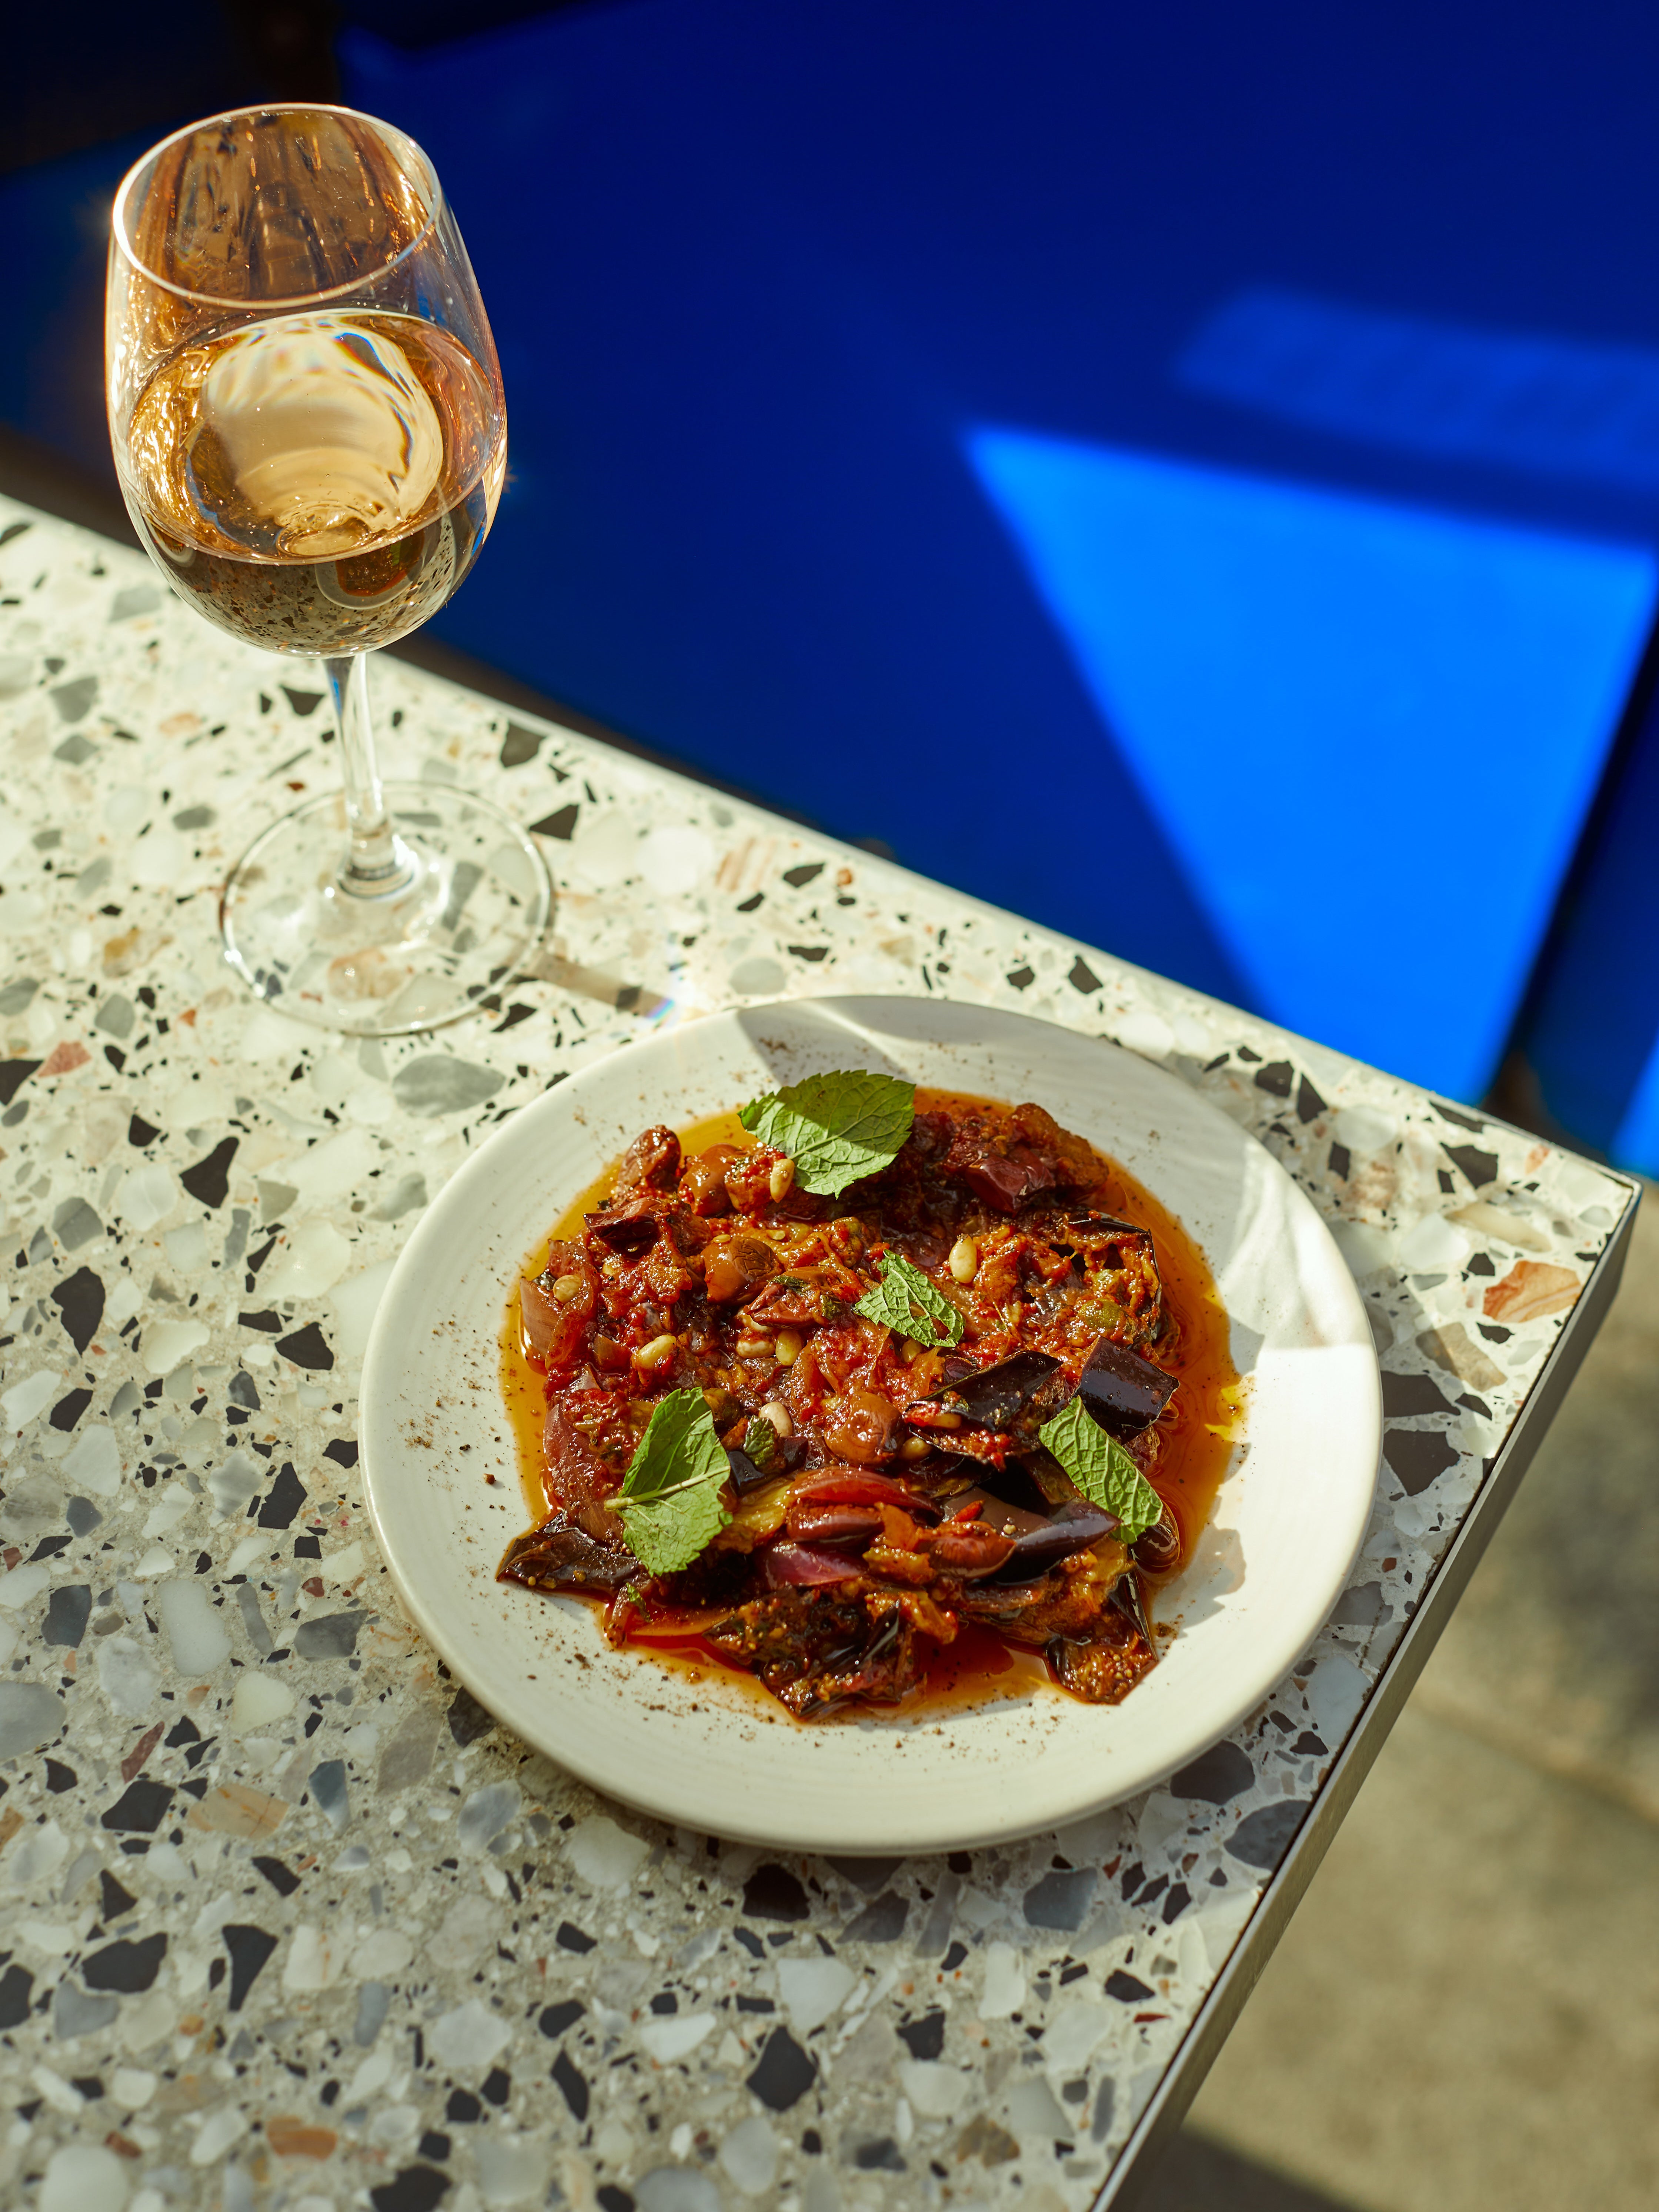 There’s no better way to harness the absorbing talents of aubergine than in a caponata